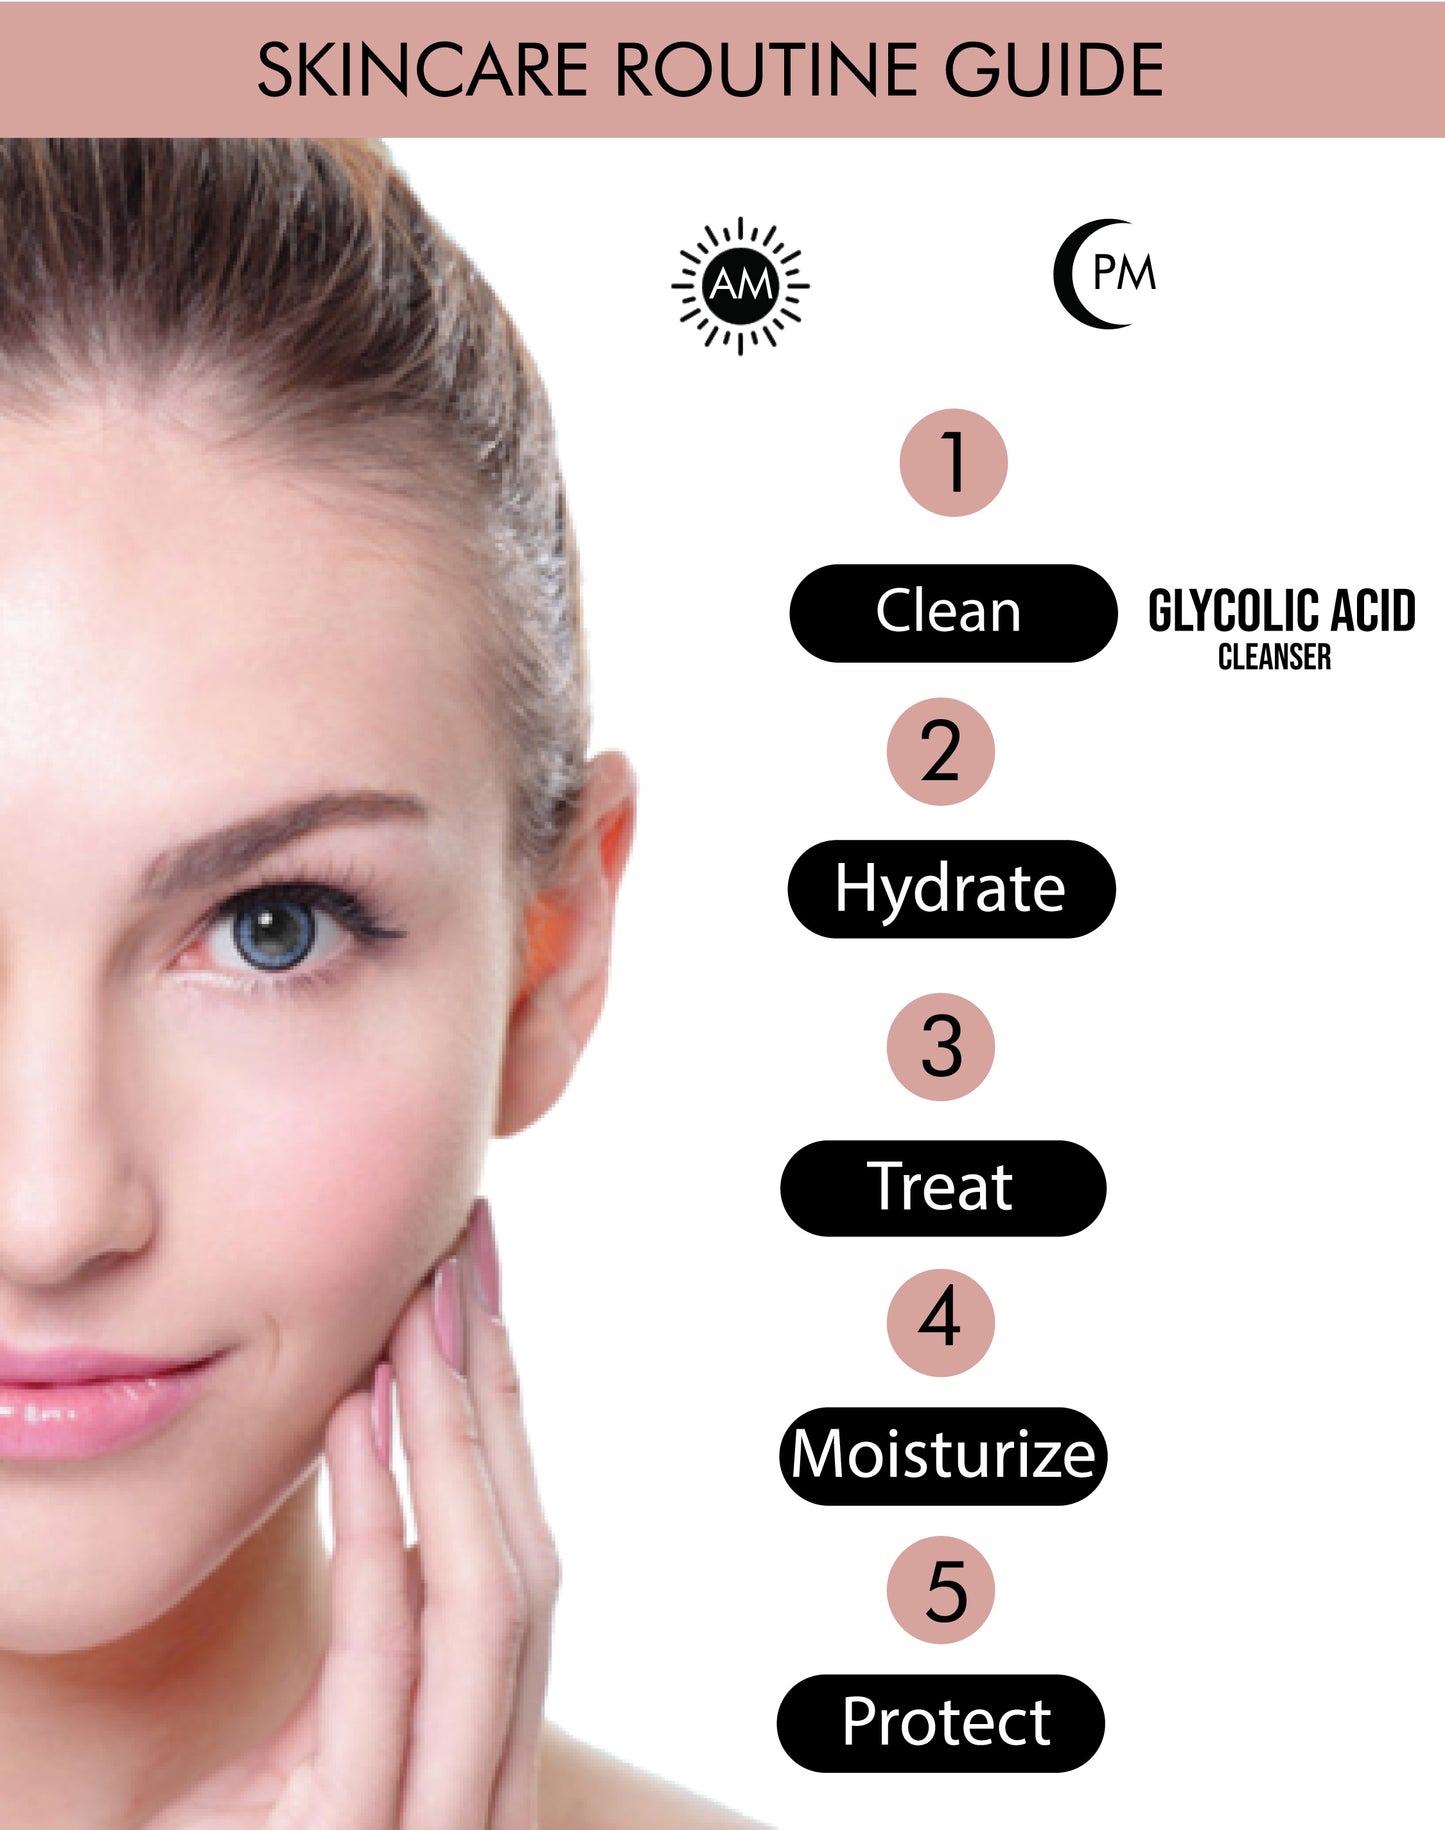 GLYCOLIC ACID CLEANSER Skincare Routine Guide